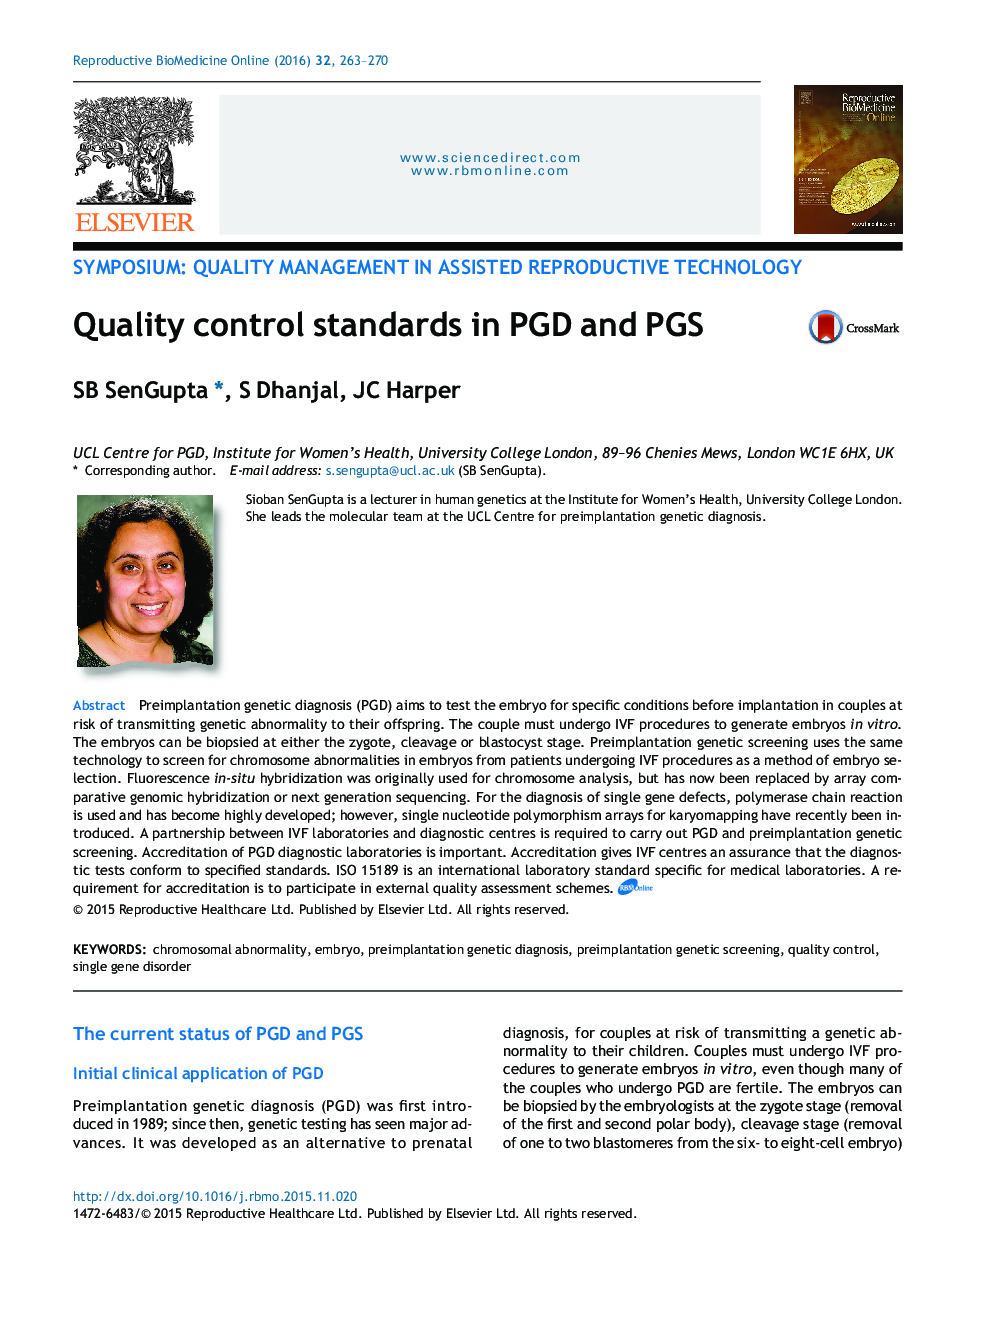 Quality control standards in PGD and PGS